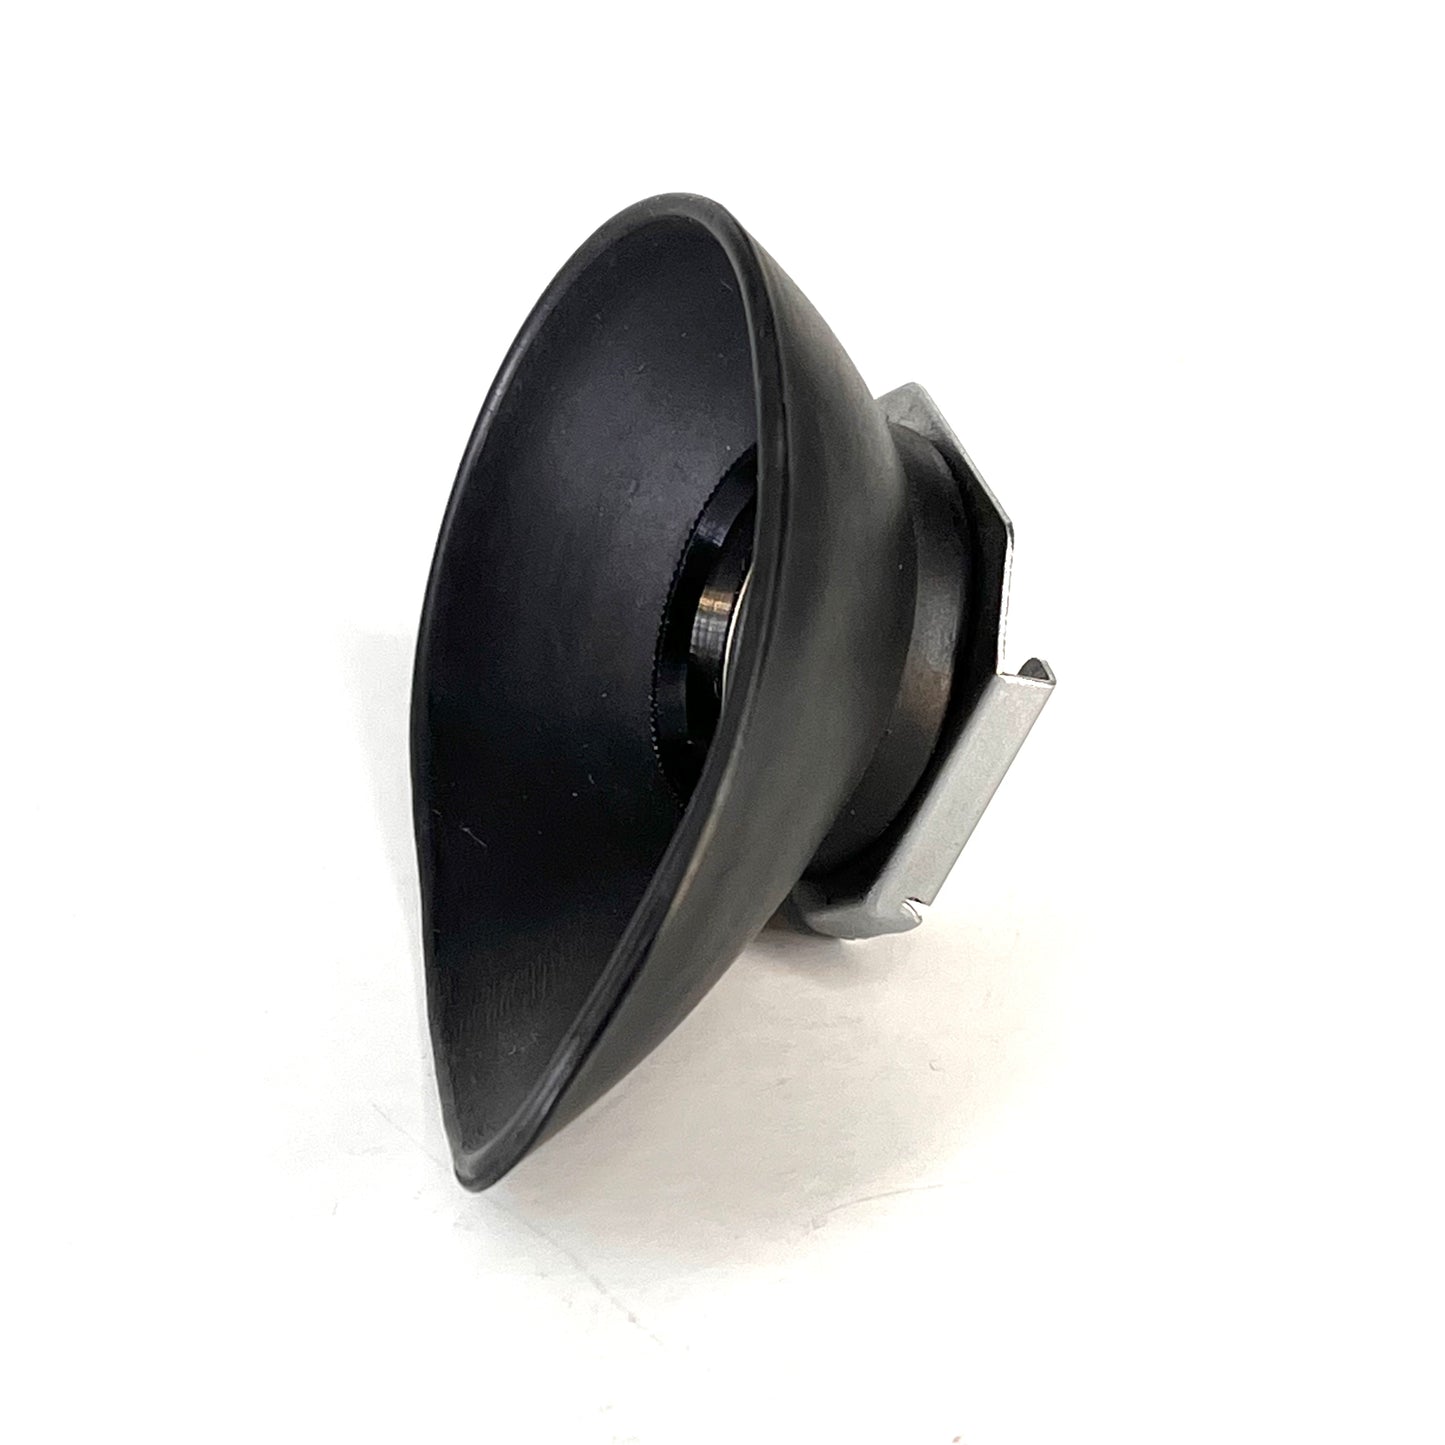 Rubber eyepiece for viewfinder